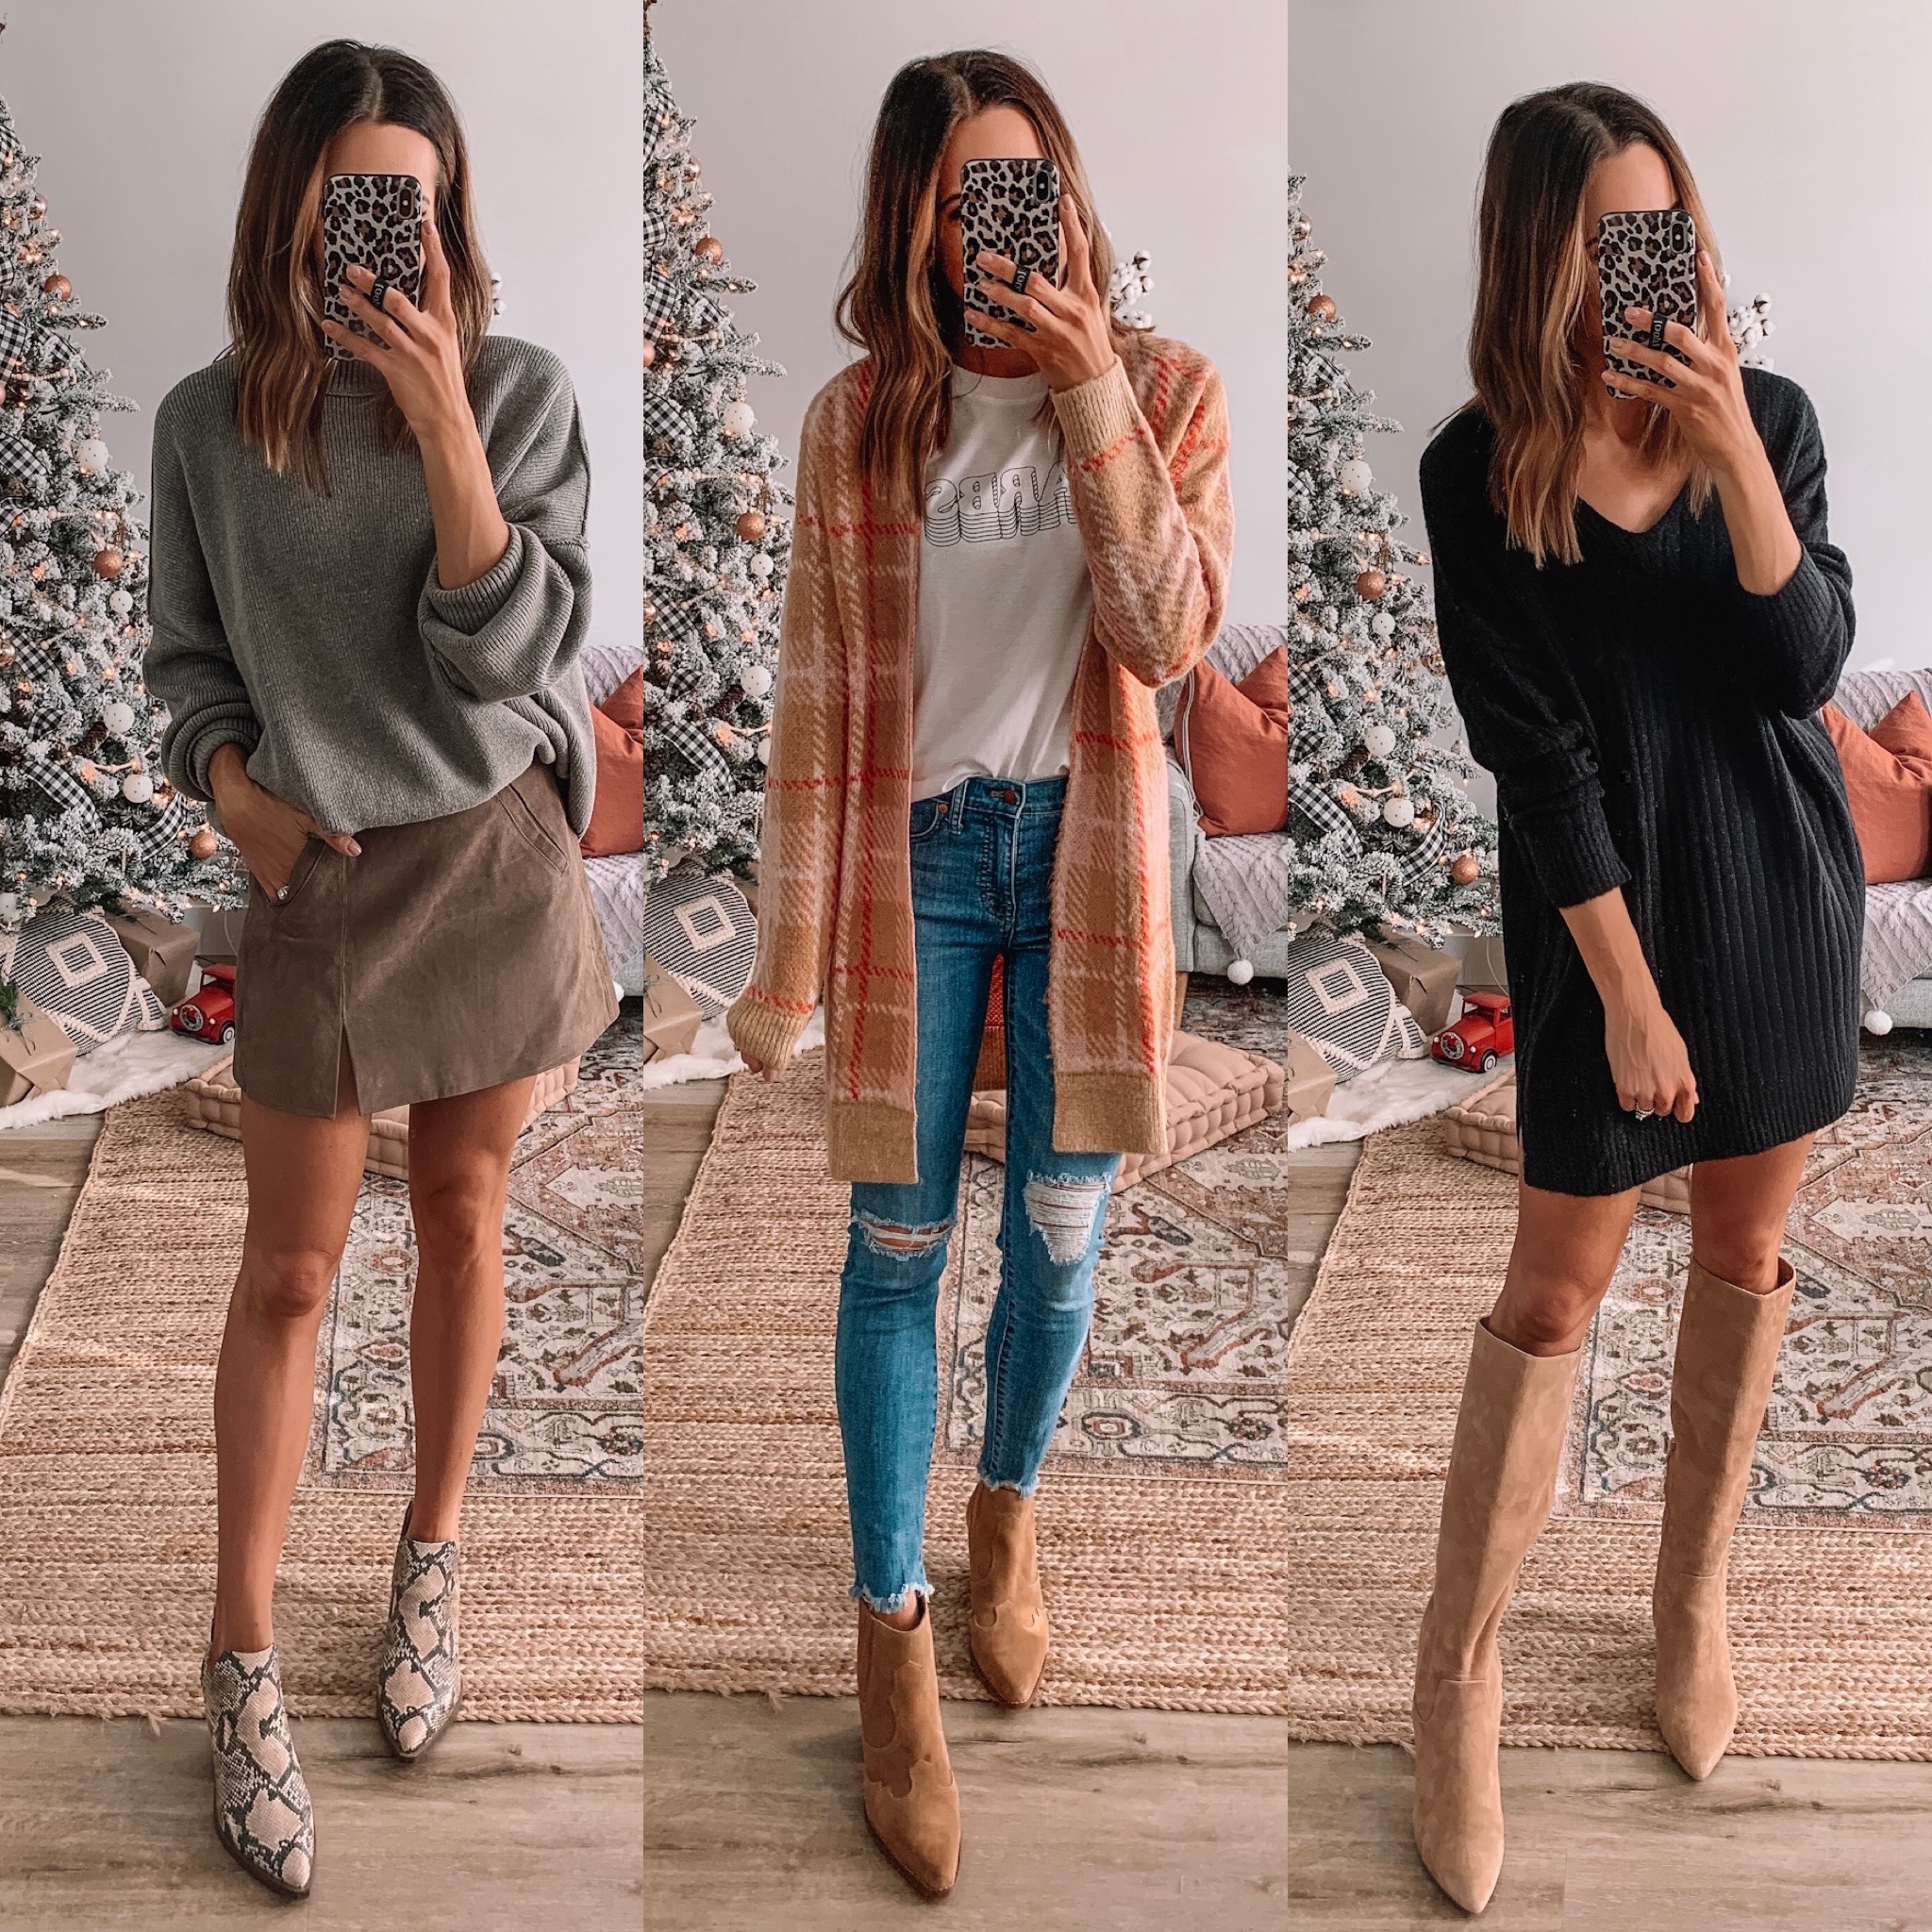 Thanksgiving Outfit Idea - My Styled Life